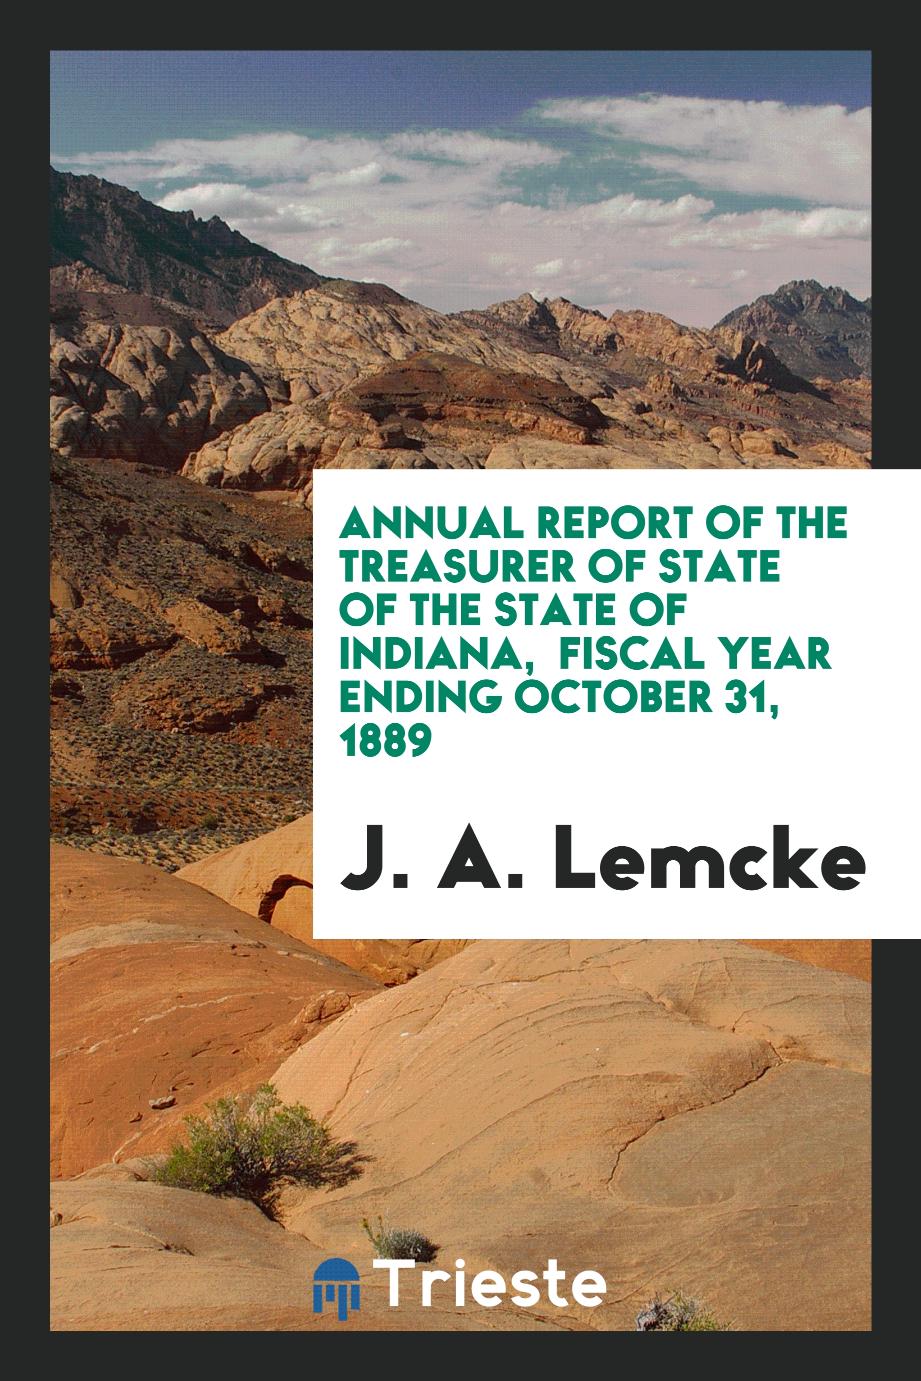 Annual report of the treasurer of state of the state of Indiana, Fiscal year ending October 31, 1889